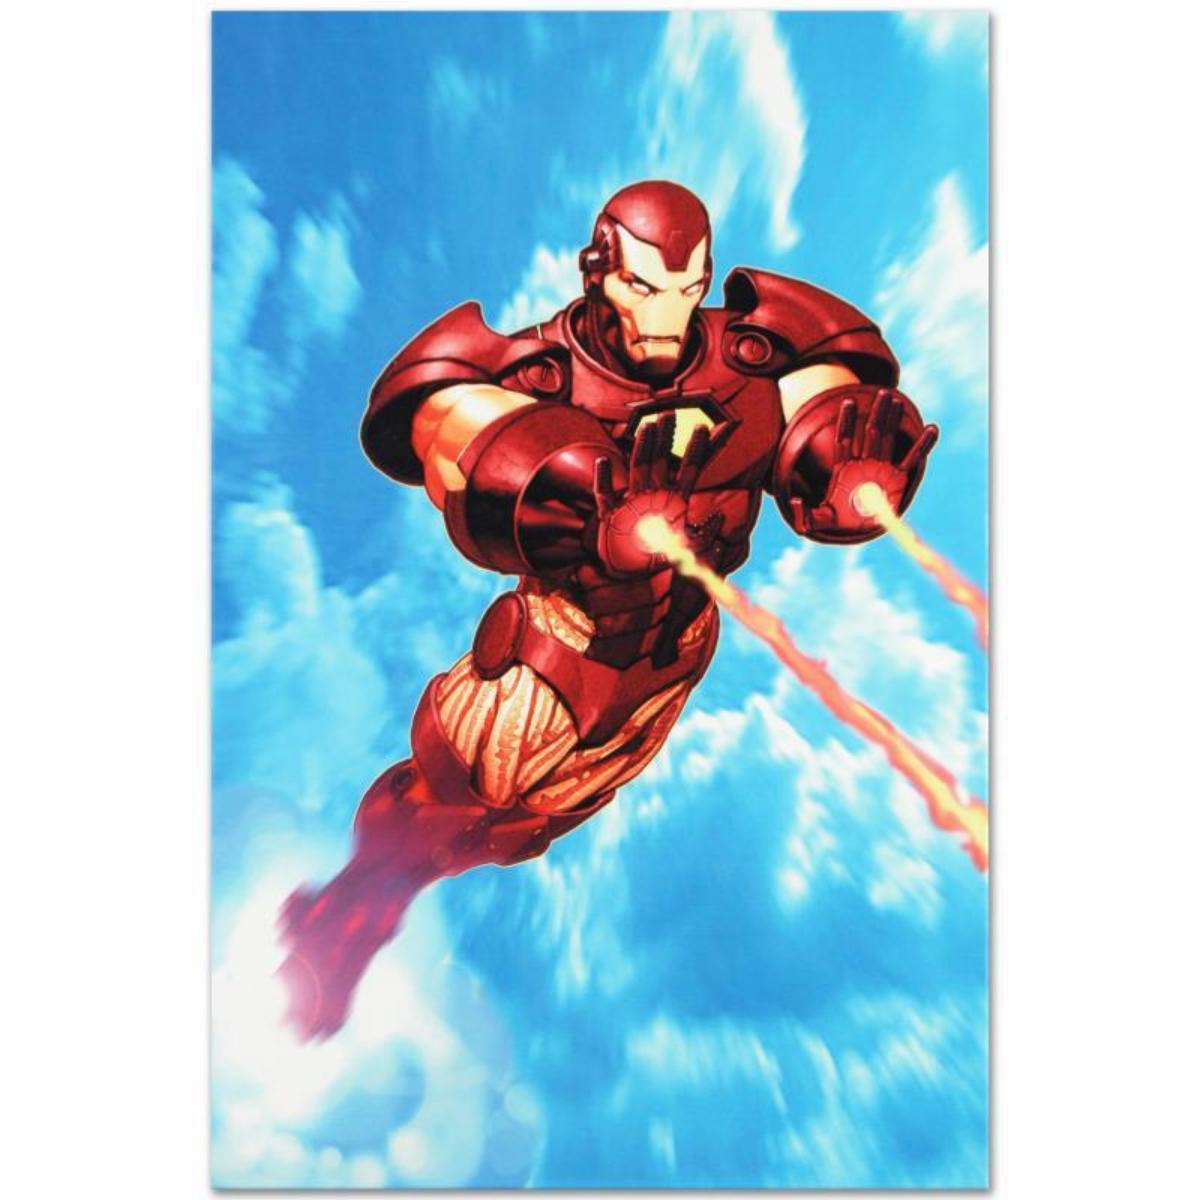 Artwork by Ariel Olivetti, Iron Man: Iron Protocols #1, Made of giclee on canvas